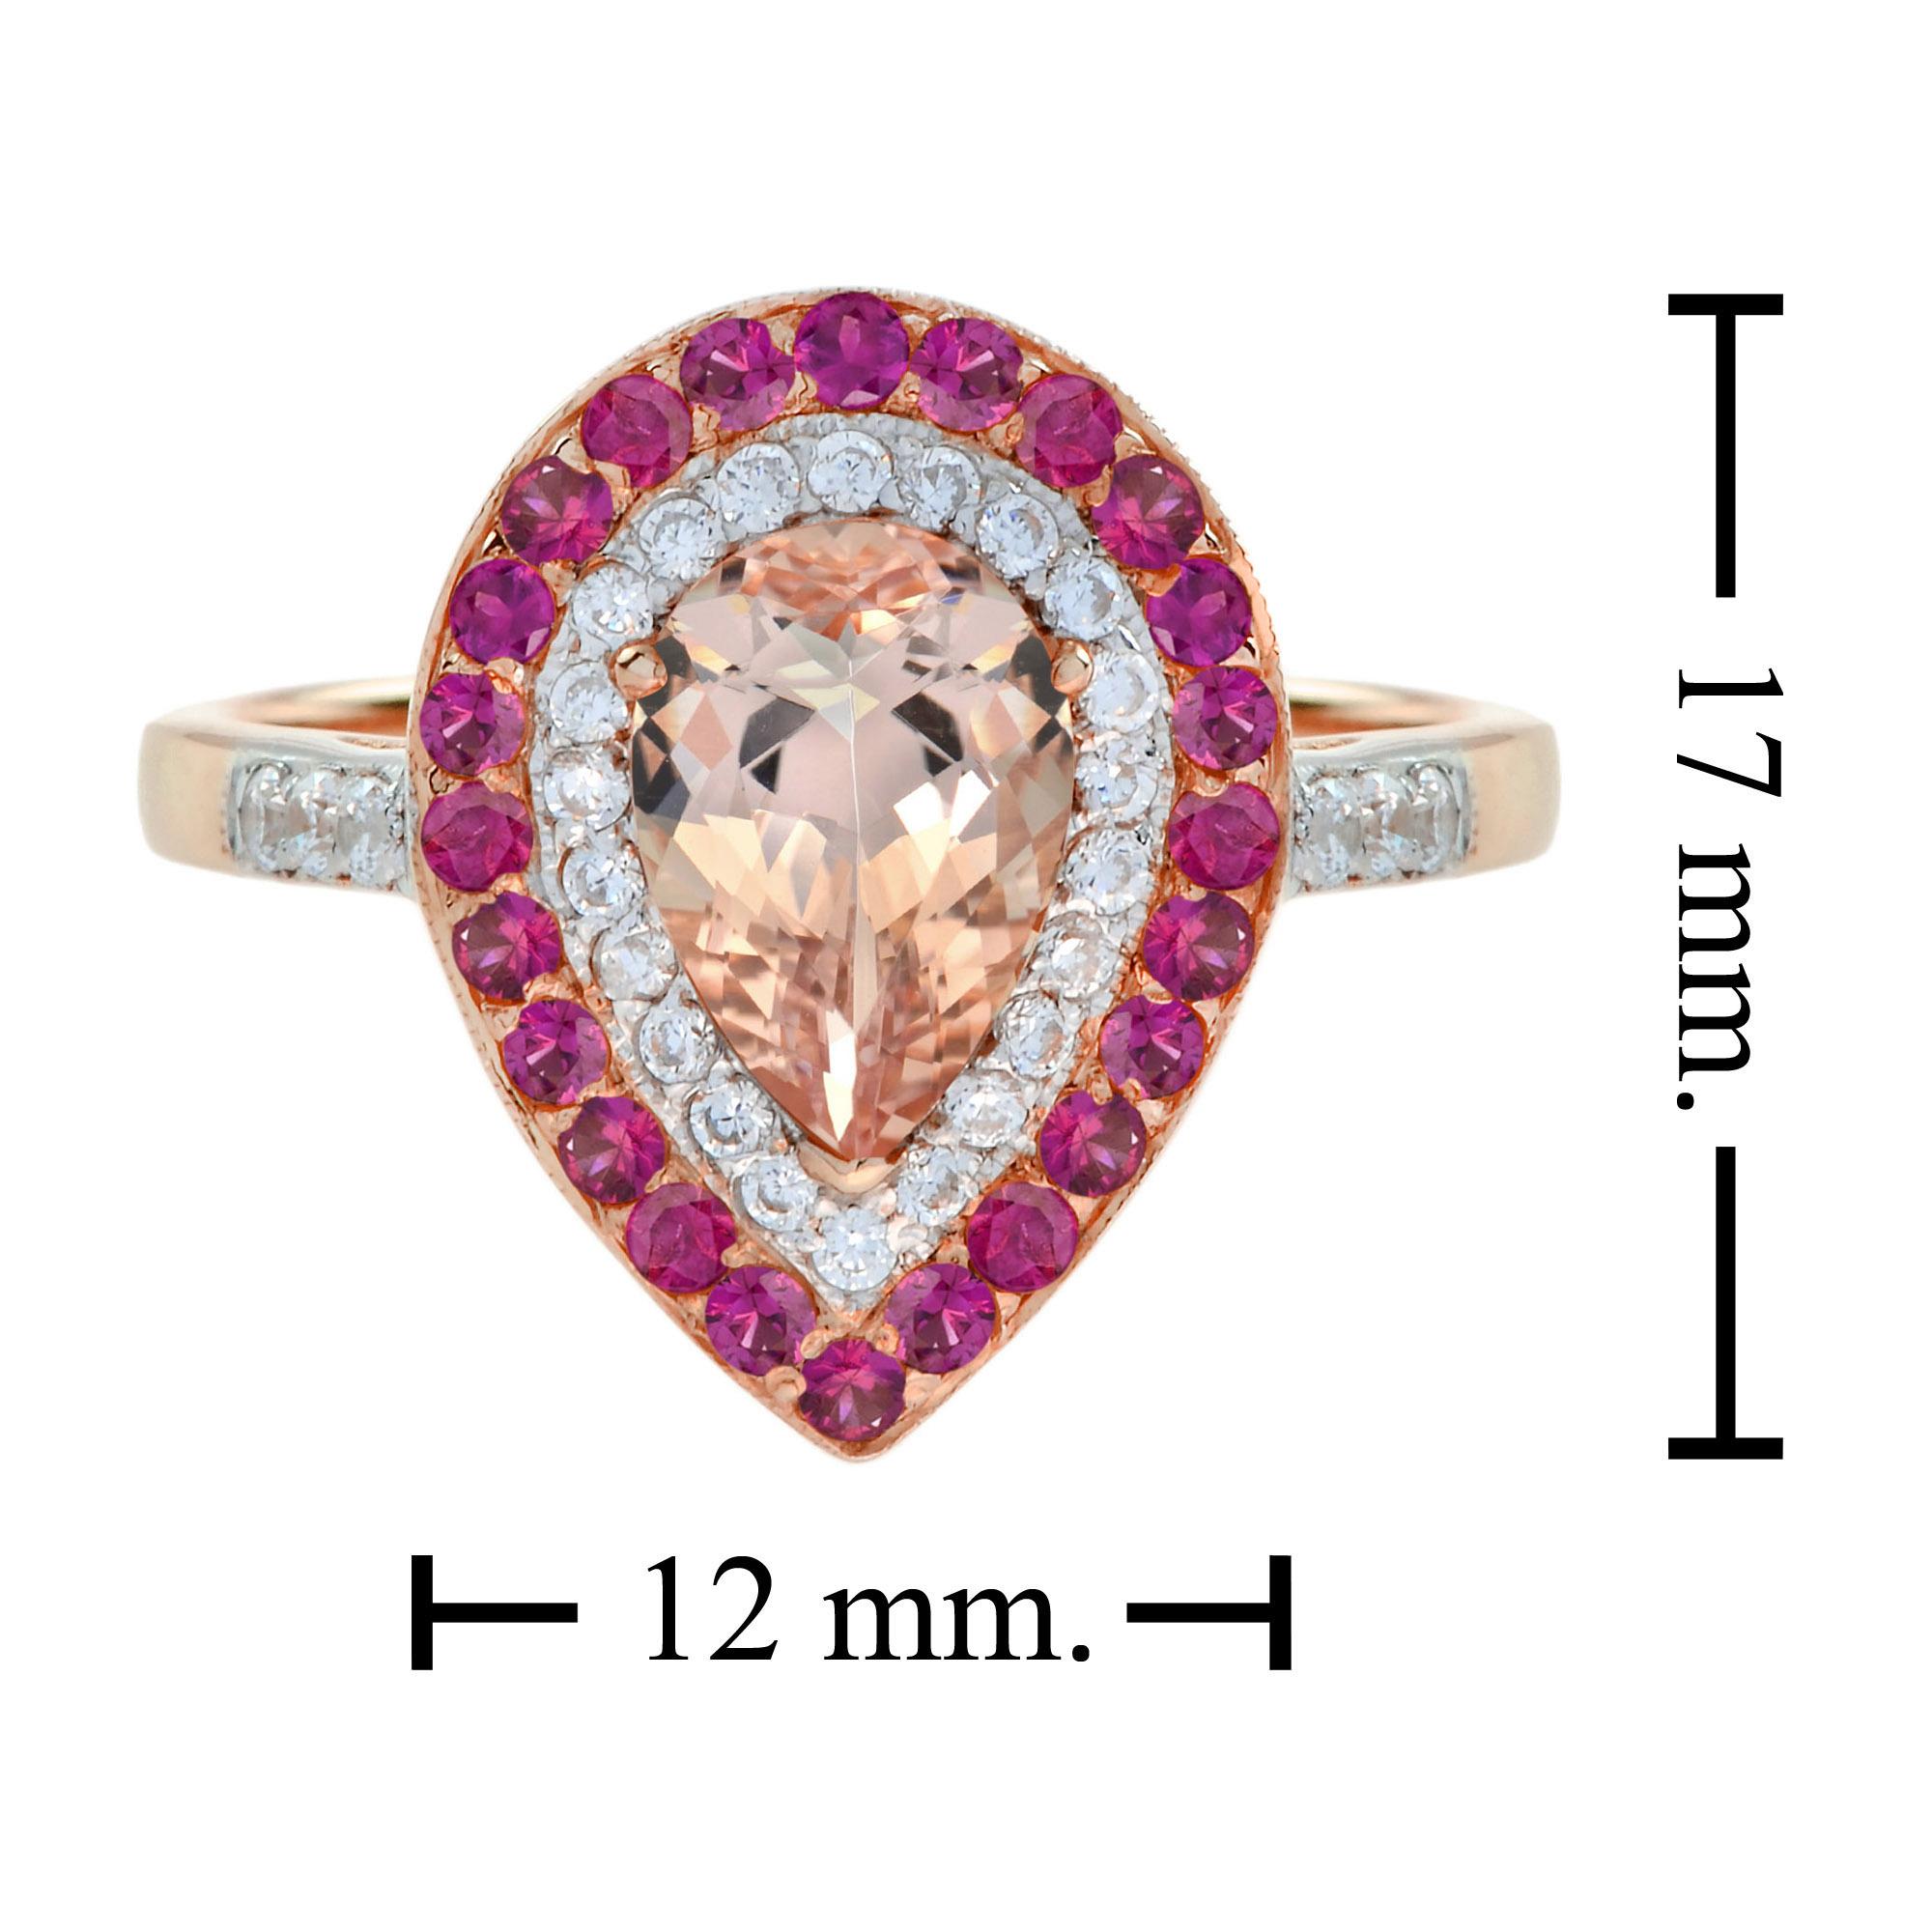 For Sale:  Morganite Diamond Ruby Pear Shaped Halo  Engagement Ring in 14K Rose Gold 7